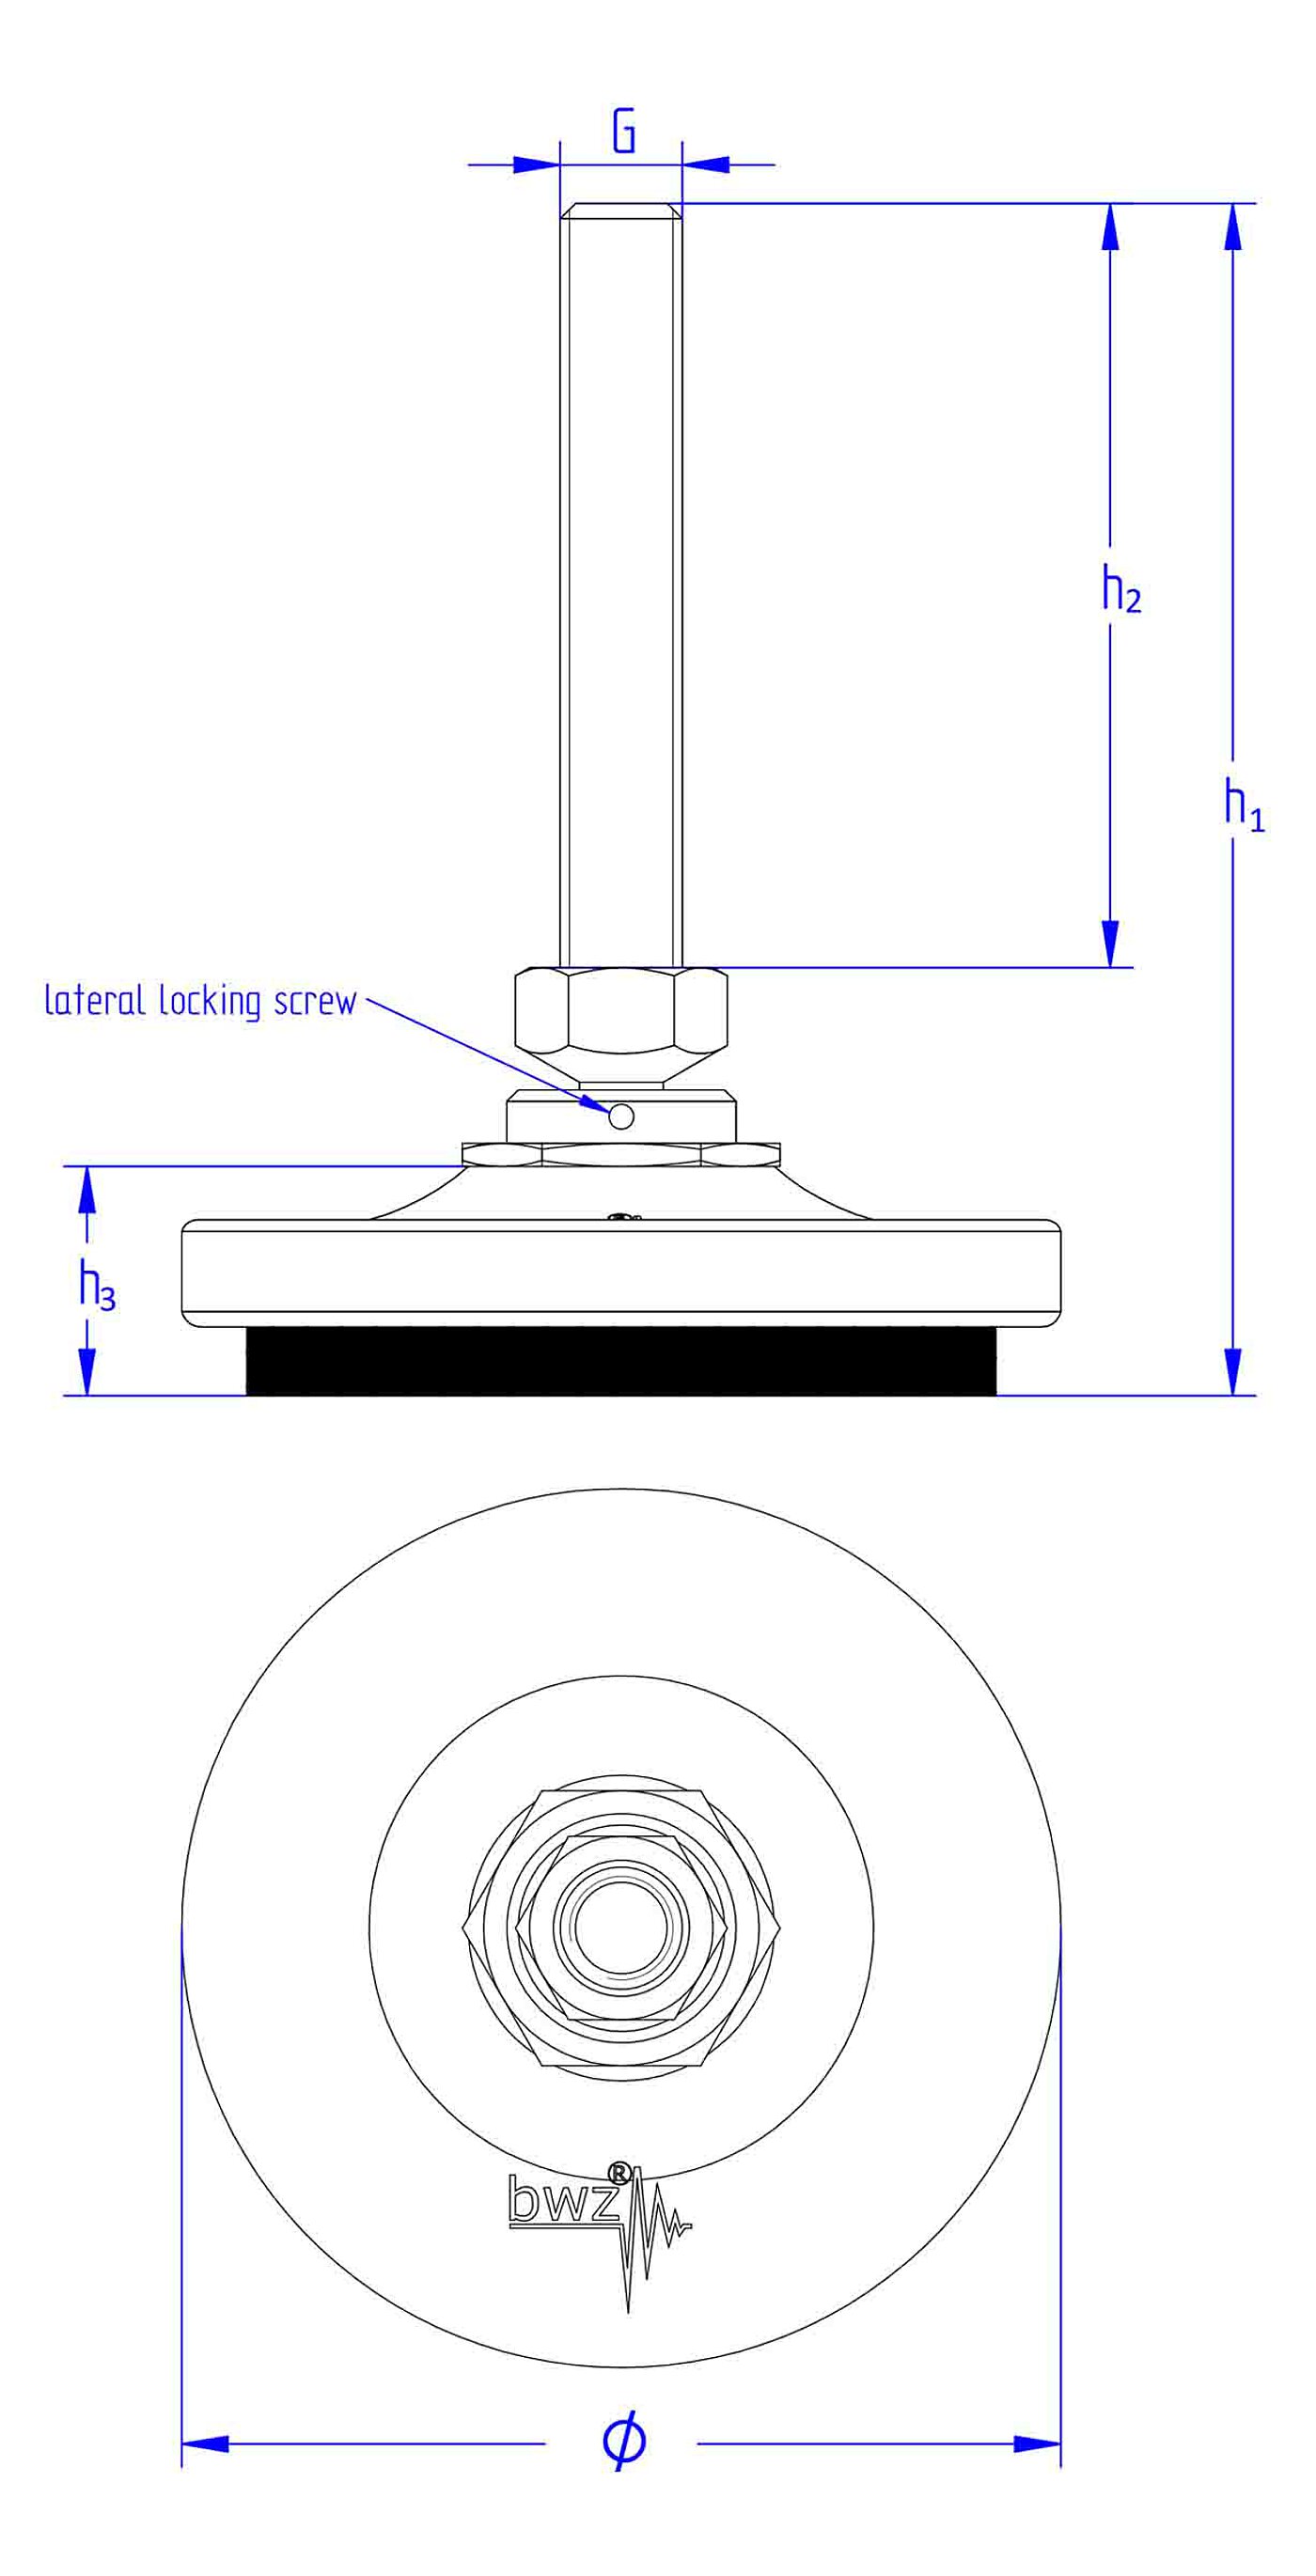 schematic drawing of a round levelling element made of cast iron, with a pendulum-action levelling screw placed in a pressure fitting on top of the cast iron corpus, secured with two small grub screws on the sides against falling apart, and elastomer for vibration damping at the bottom, in the side view and the view from the top